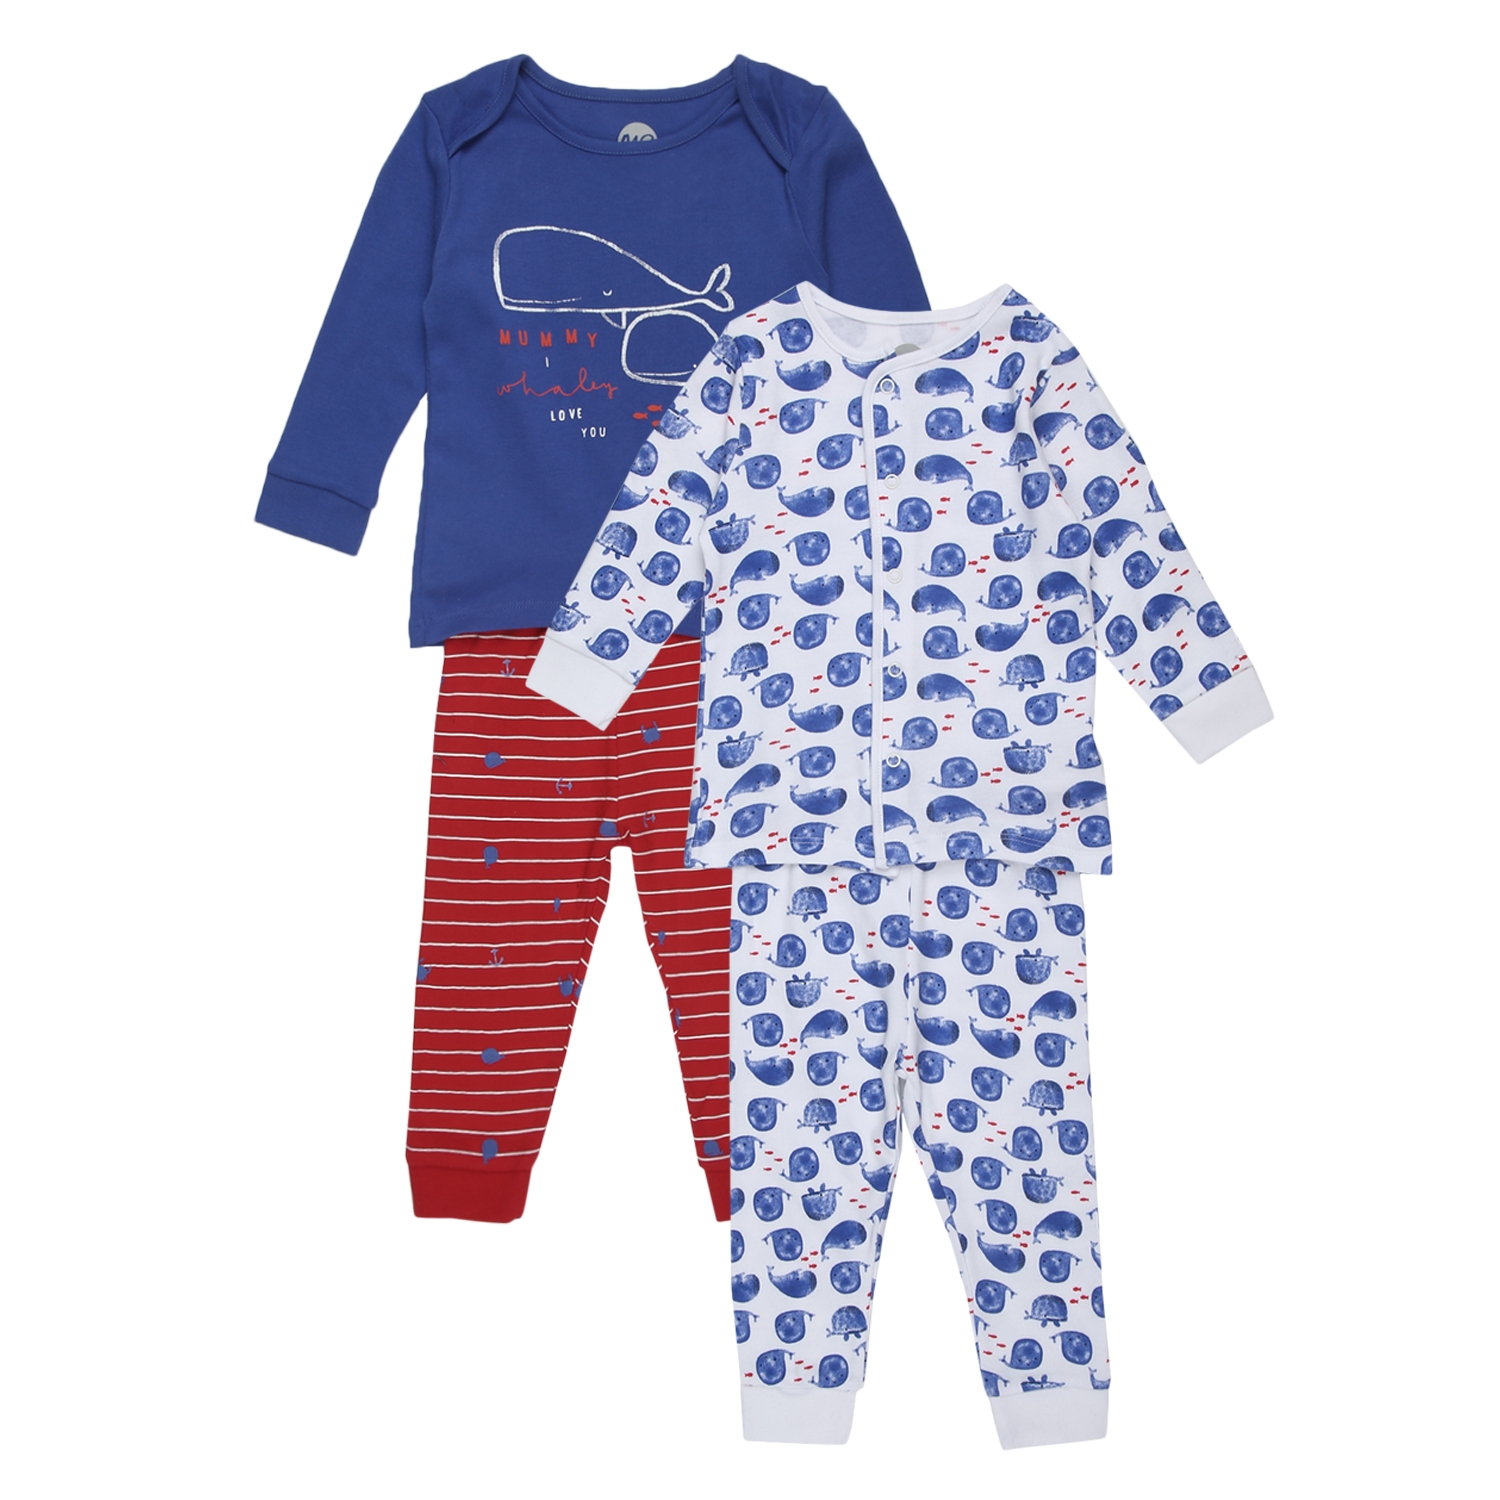 Mothercare | Boys Full sleeves Whale print Pyjamas - Pack of 2 - Blue red